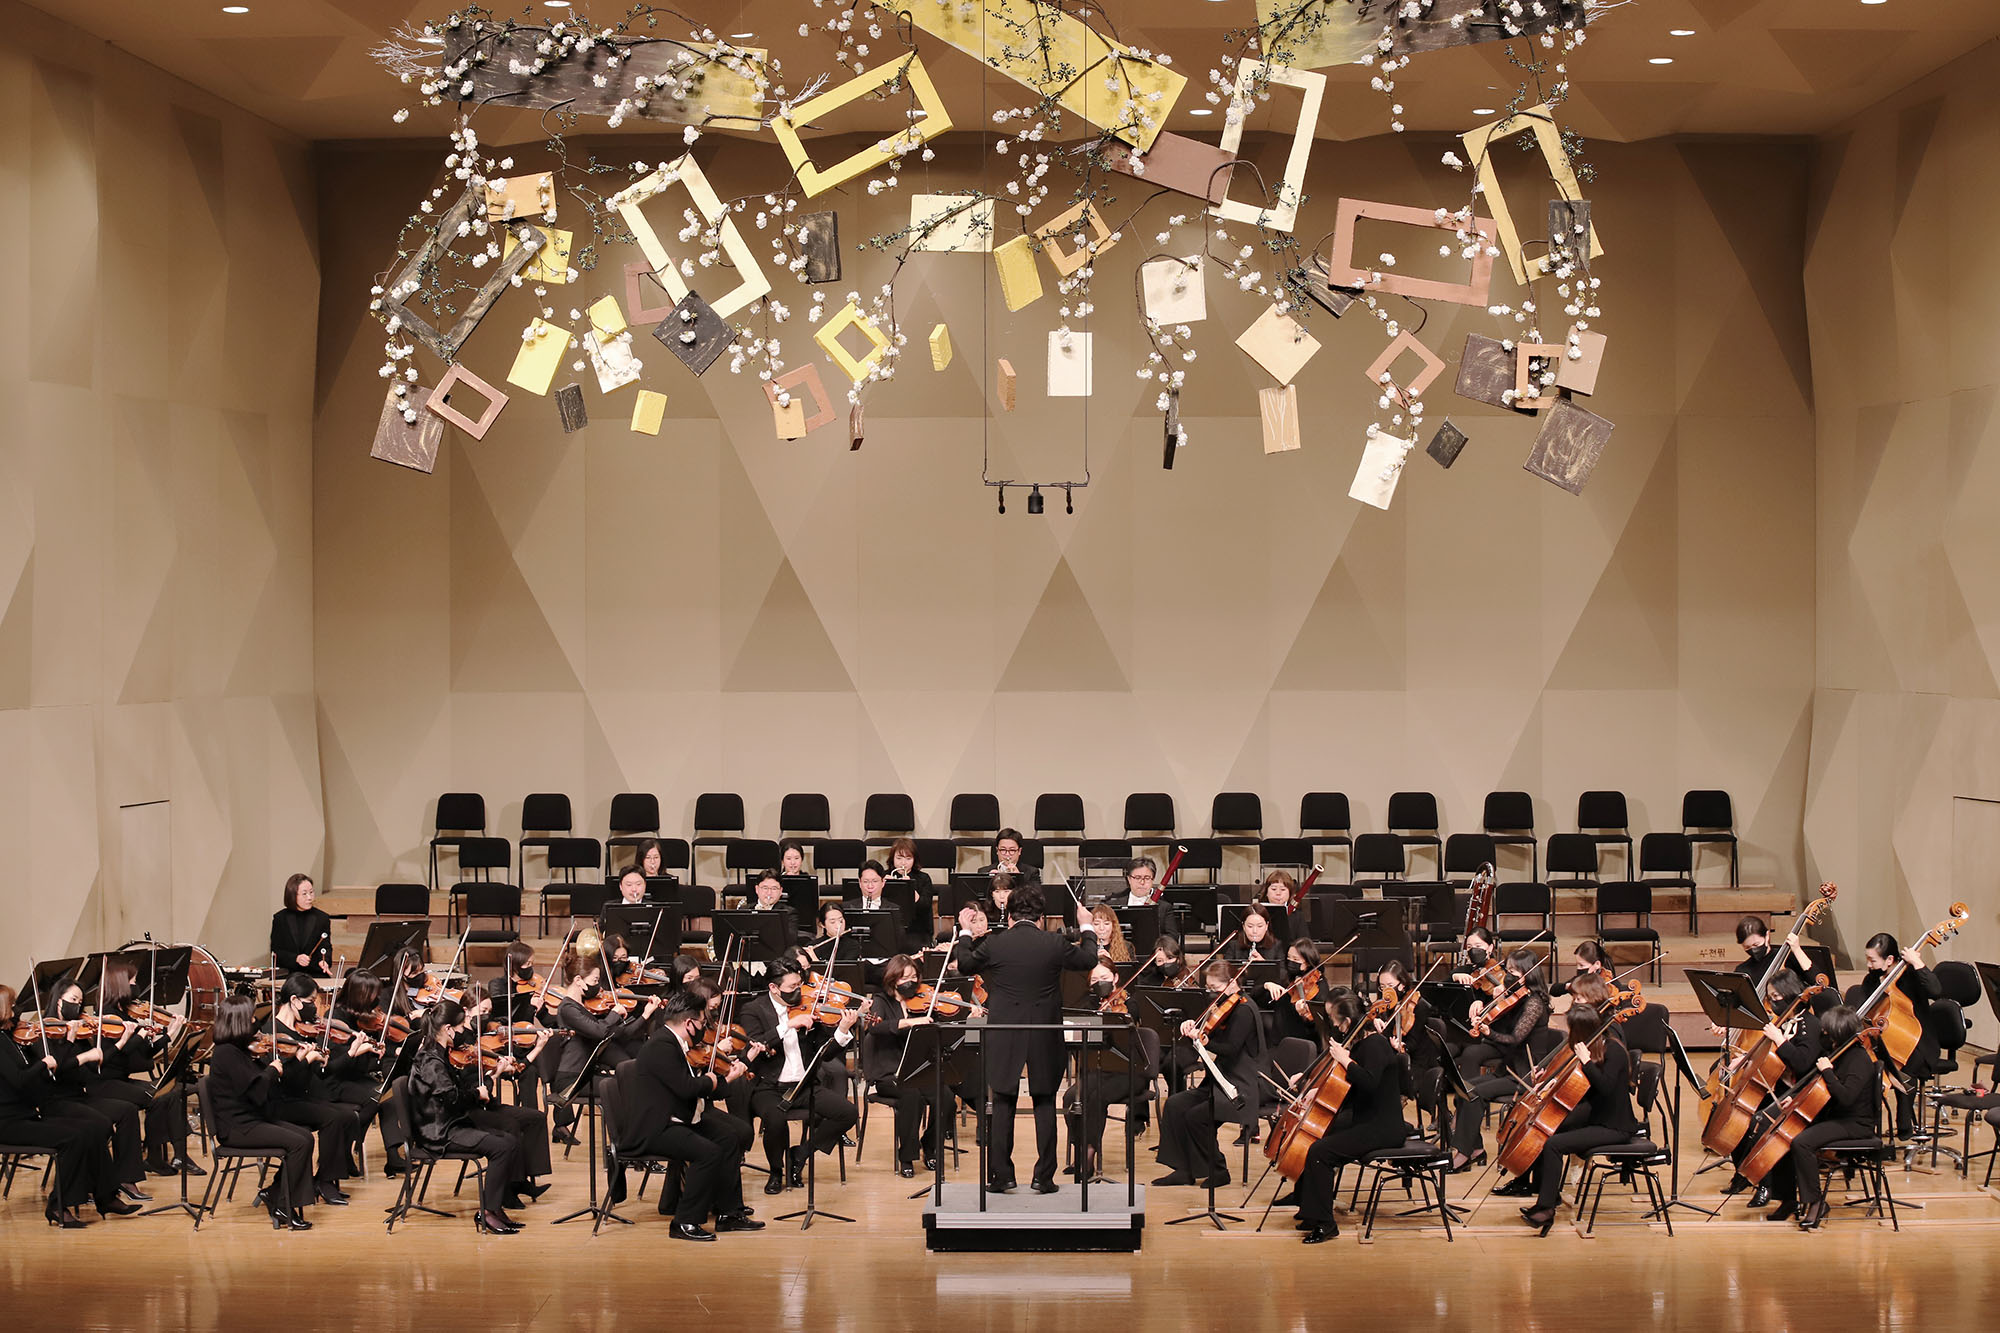 [12.29] Bucheon Philharmonic Orchestra 298th Subscription Concert - Farewell Concert 'Beethoven, Choral'